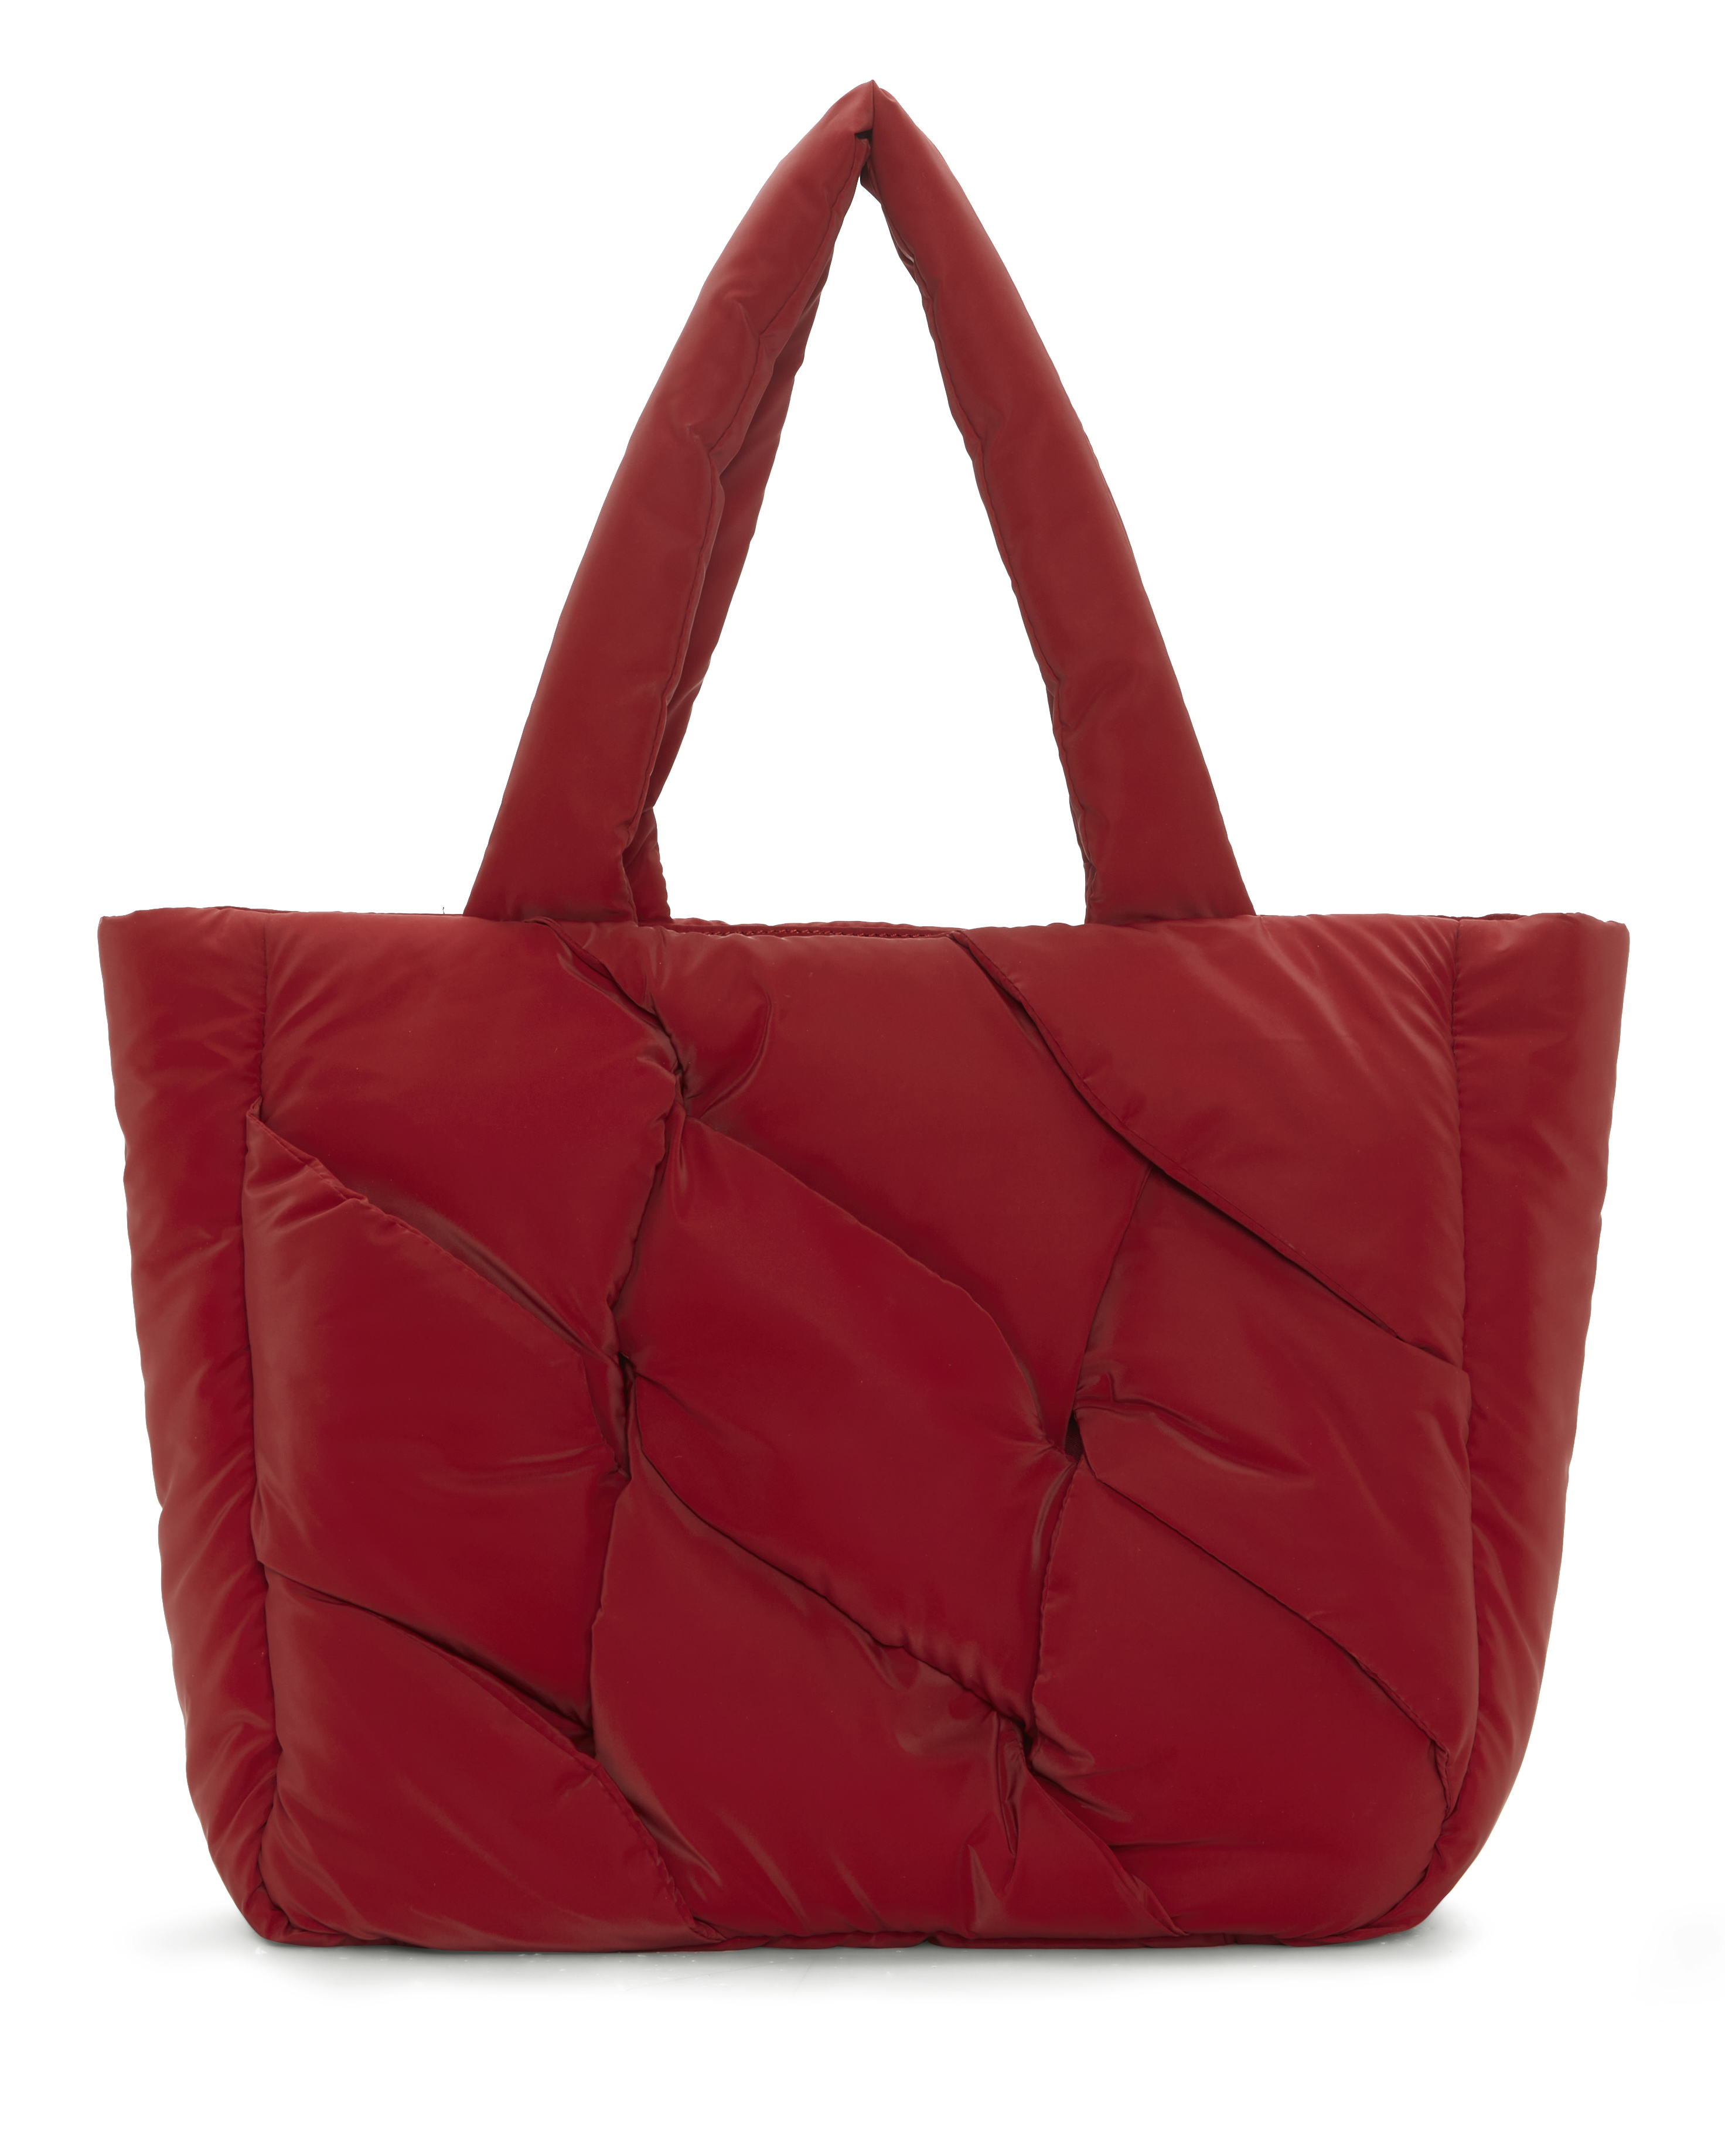 Women's Vince Camuto Dayah Tote Sangria